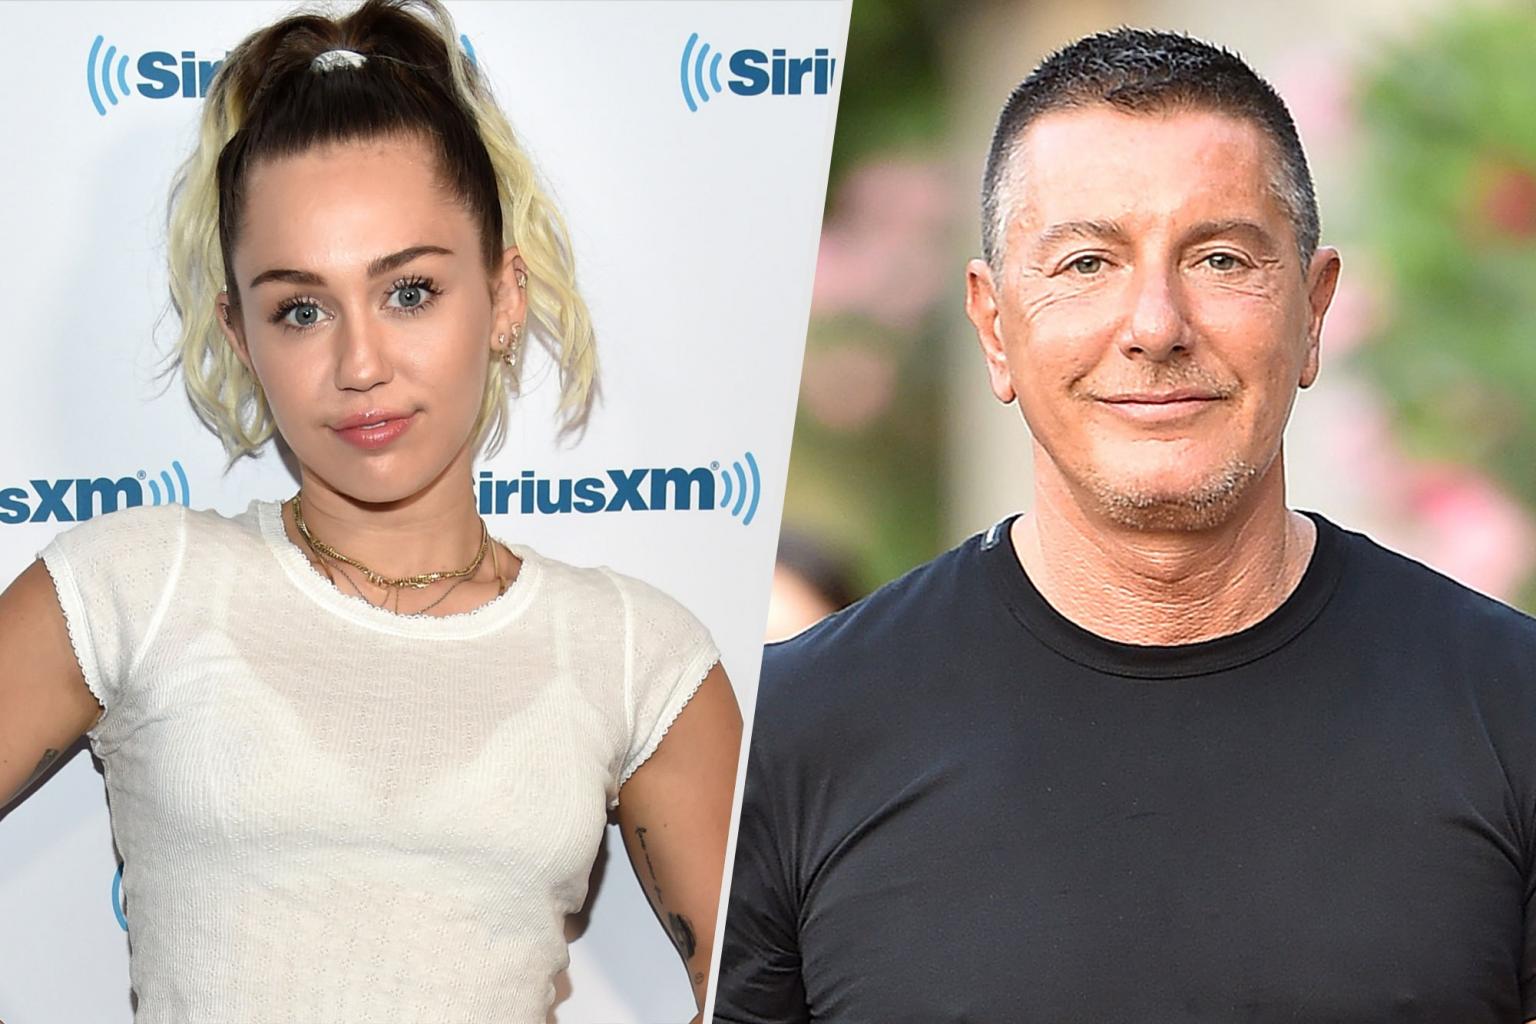 Miley Cyrus and Dolce & Gabbana Designer Get in a Heated Exchange About Politics